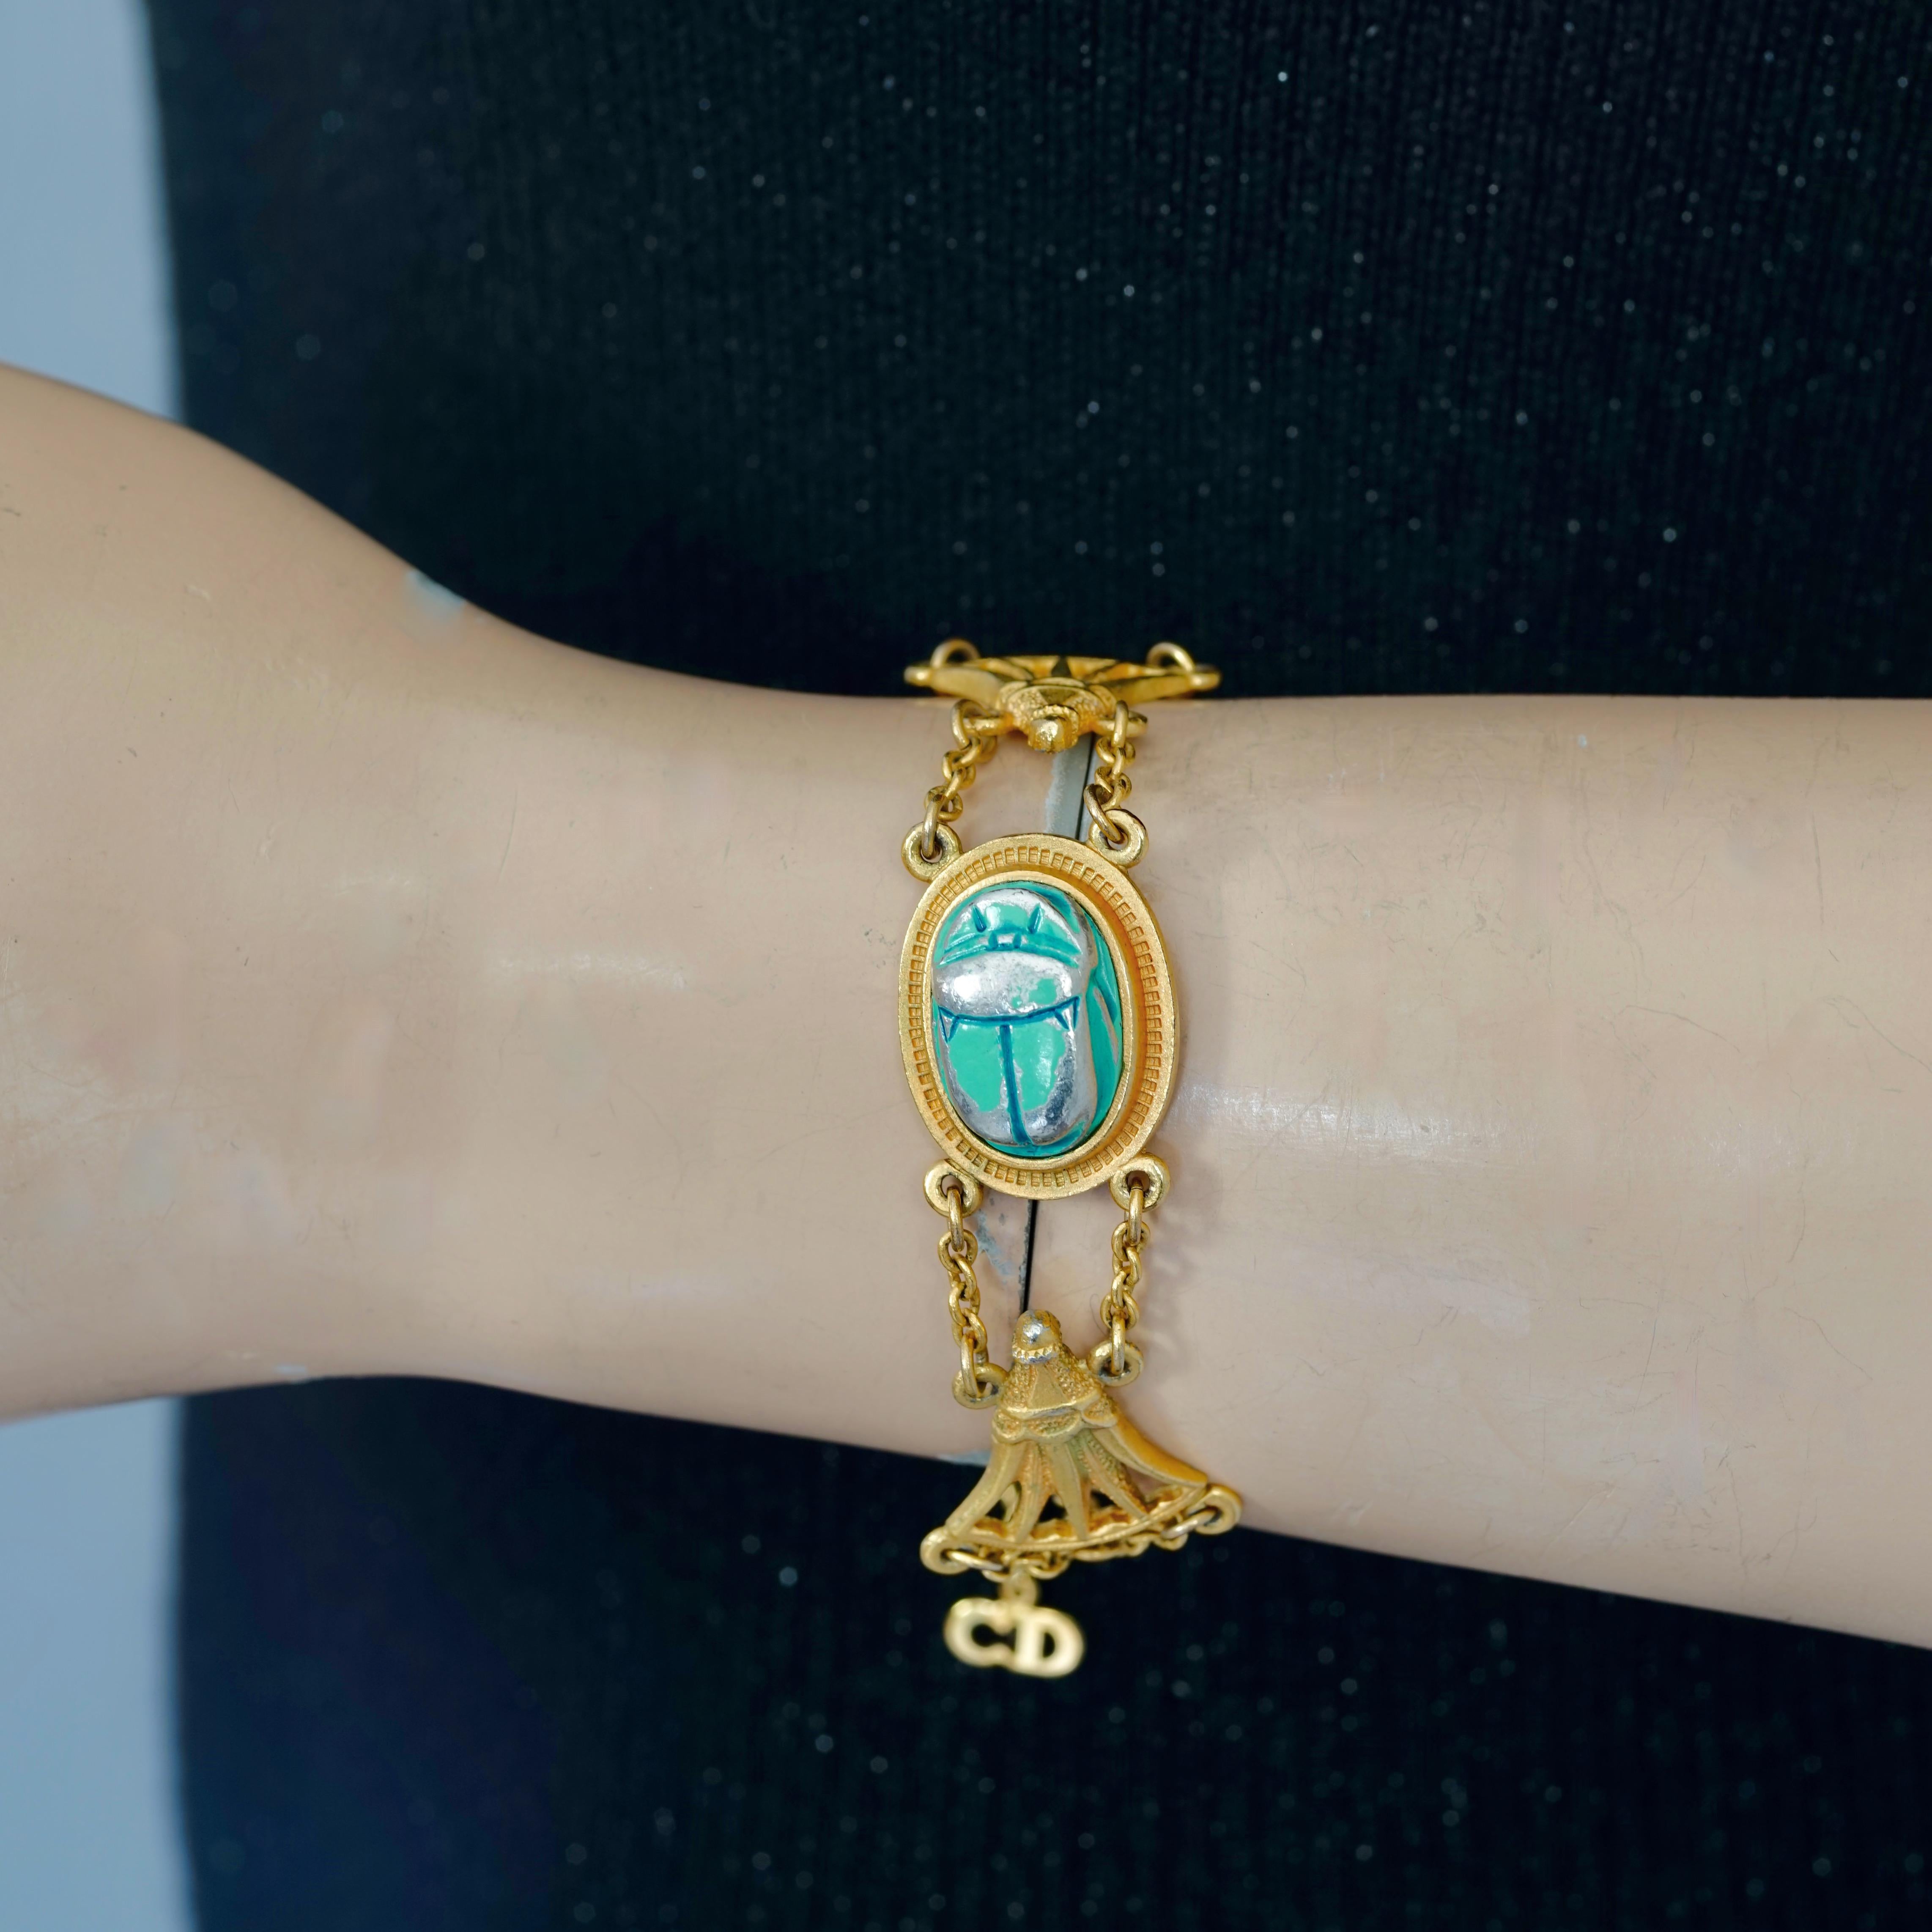 Vintage CHRISTIAN DIOR Egyptian Revival Scarab Chain Bracelet

Measurements:
Height: 0.78 inch (2 cm)
Adjustable Total Length: 8.07 inches (20.5 cm) maximum

Features:
- 100% Authentic CHRISTIAN DIOR.
- Egyptian Revival style bracelet with faux